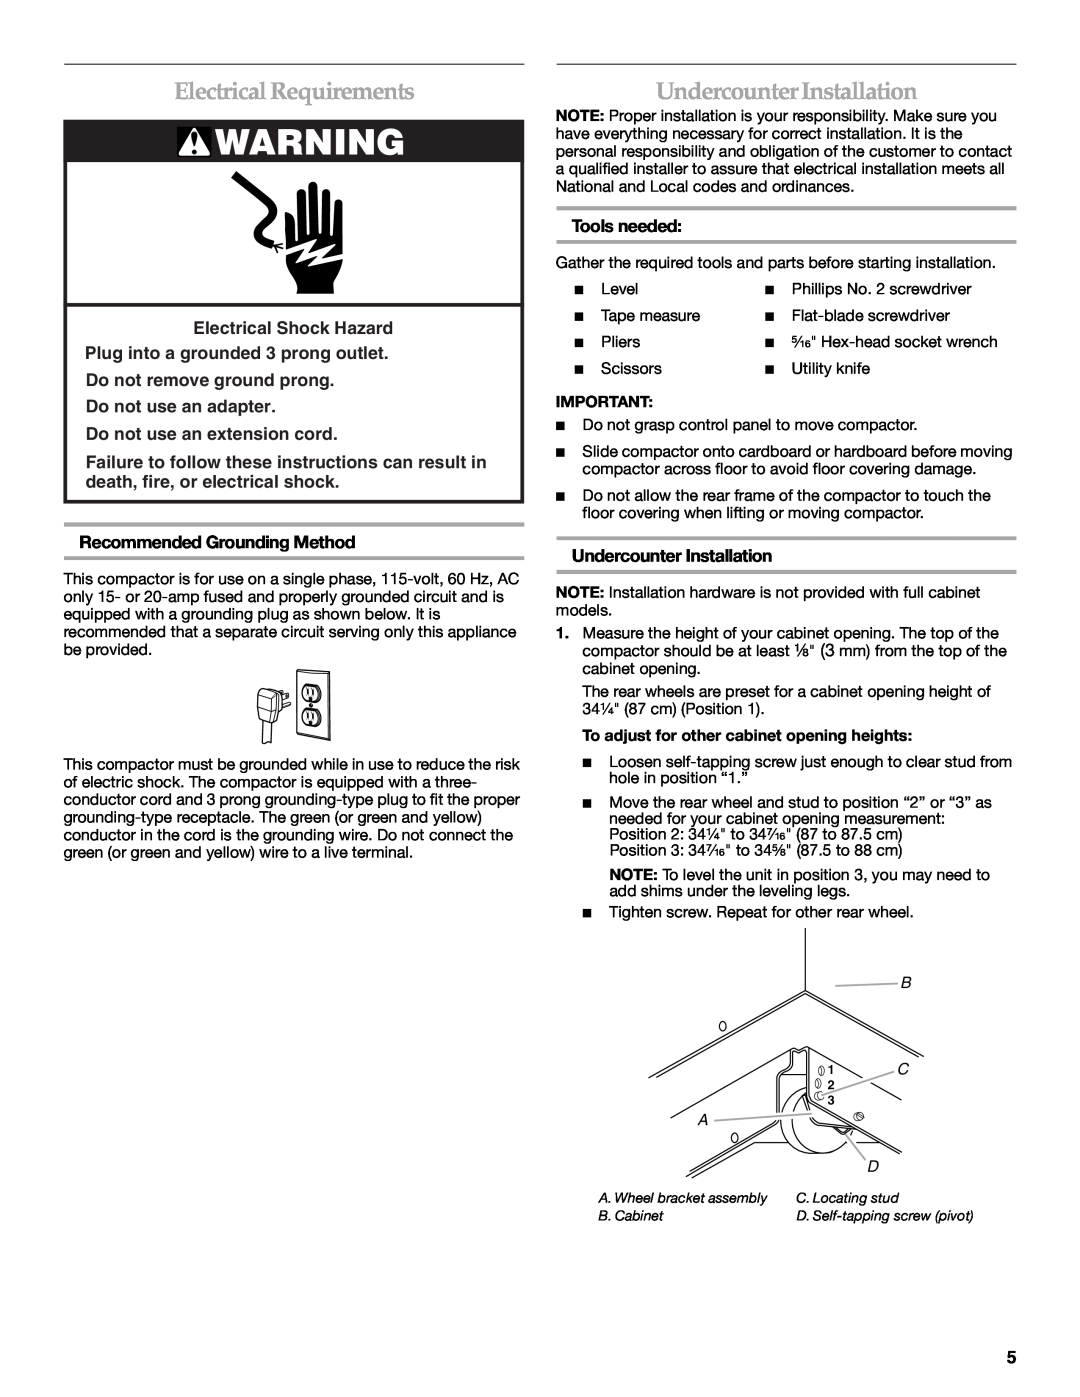 KitchenAid 9871915B Electrical Requirements, UndercounterInstallation, Do not remove ground prong Do not use an adapter 